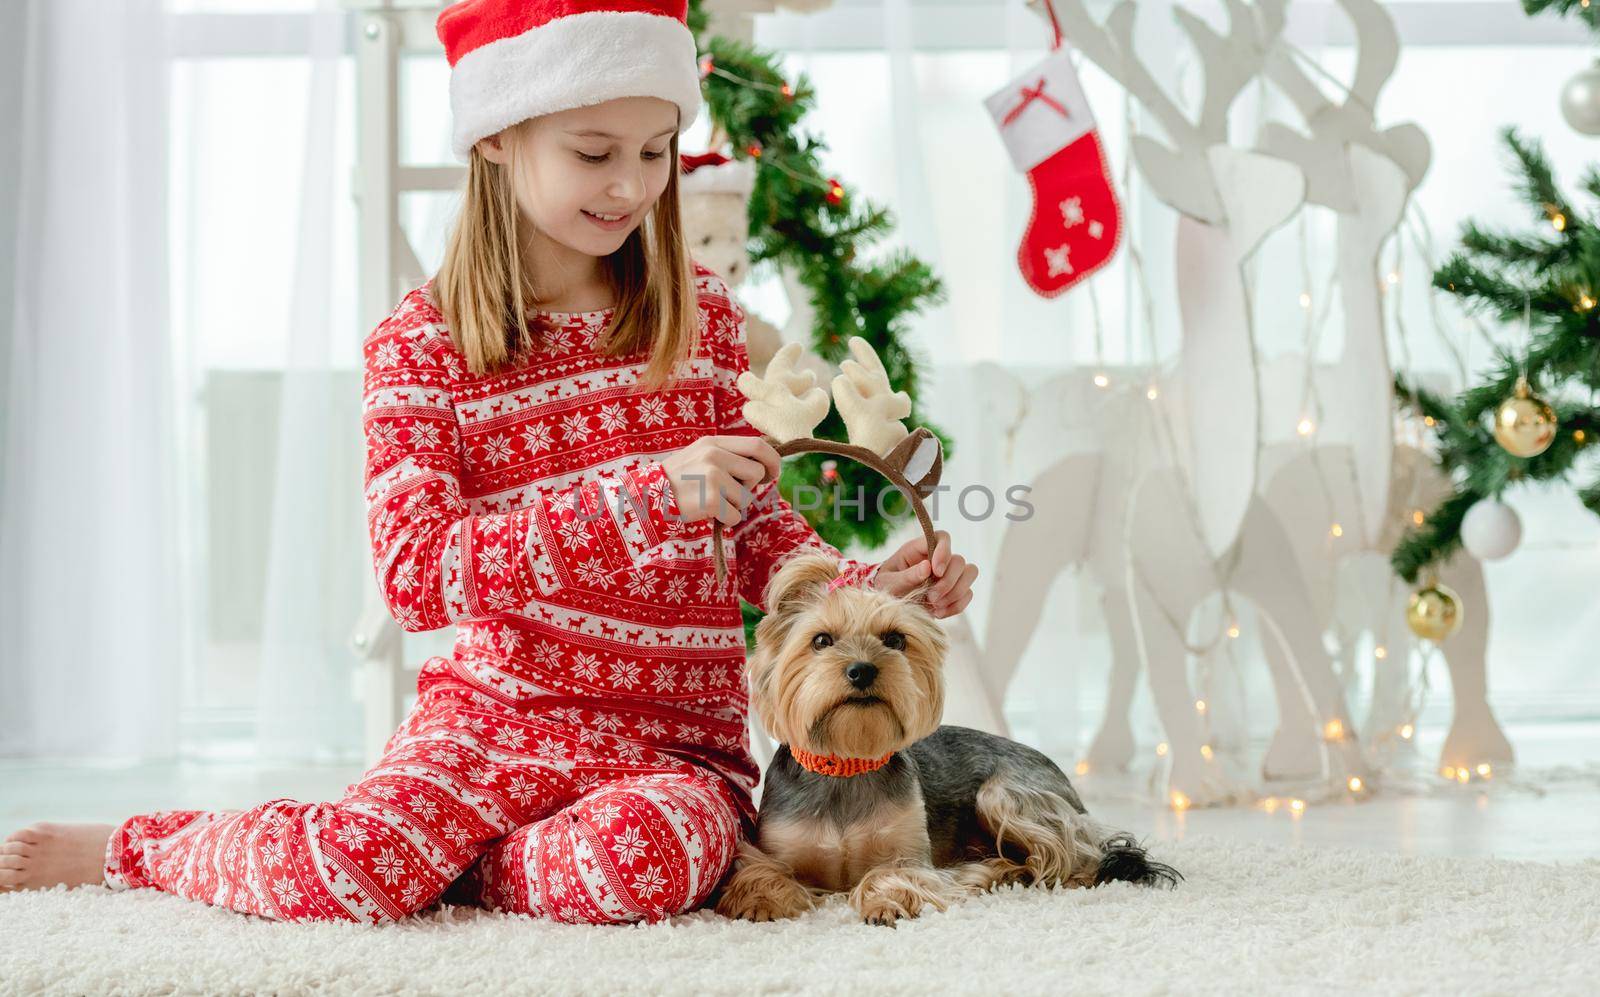 Child girl with dog at Christmas time at home with holiday decoration. Kid wearing red costume and pet doggy in room with New Year decoration